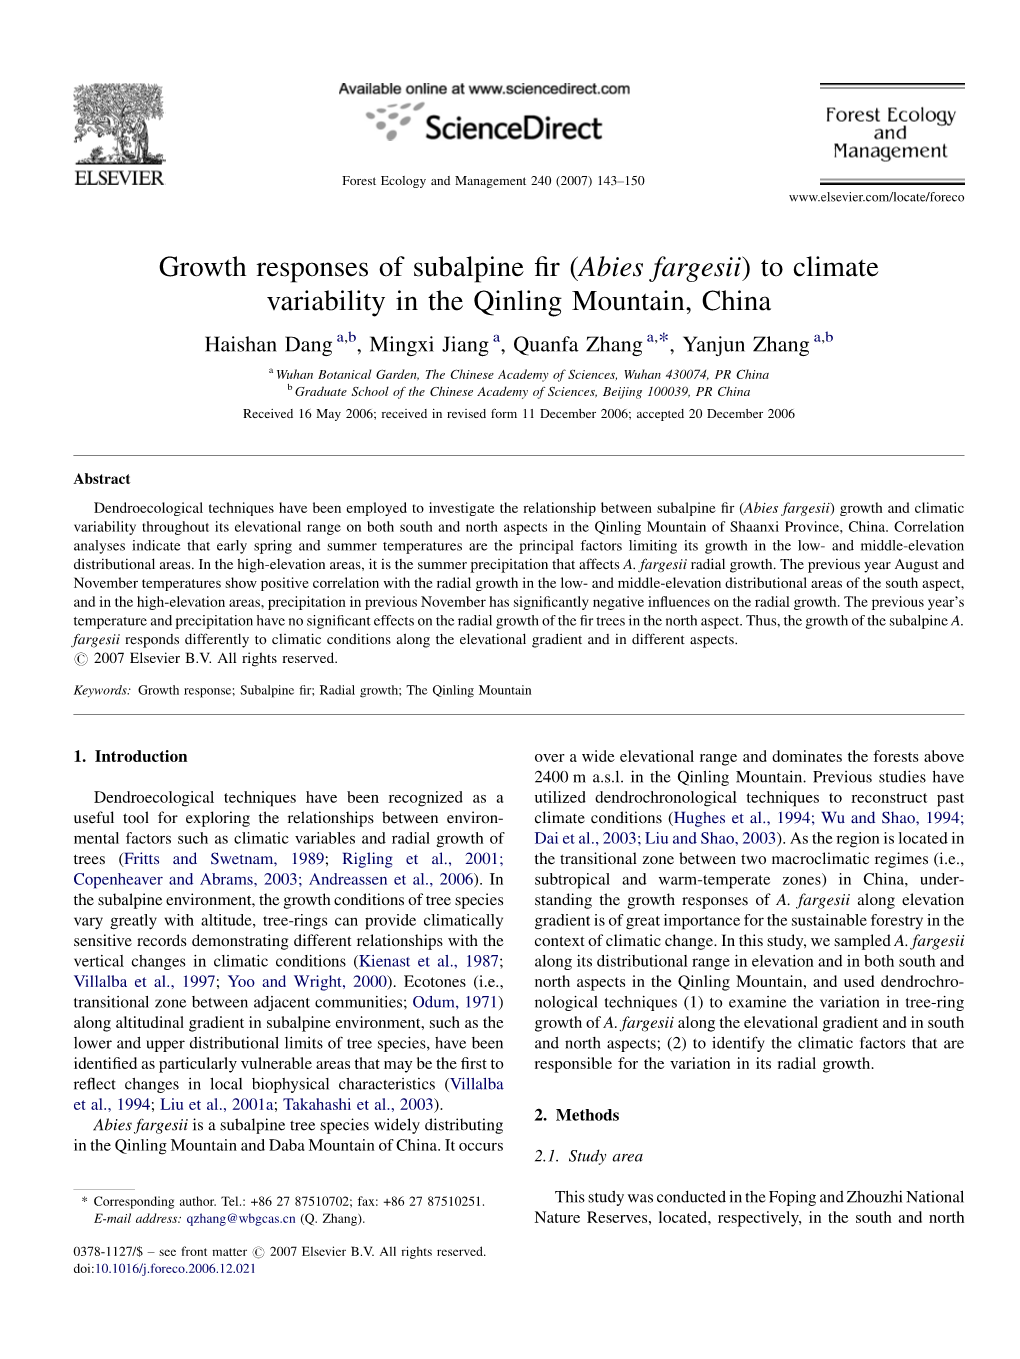 Growth Responses of Subalpine Fir (Abies Fargesii) to Climate Variability